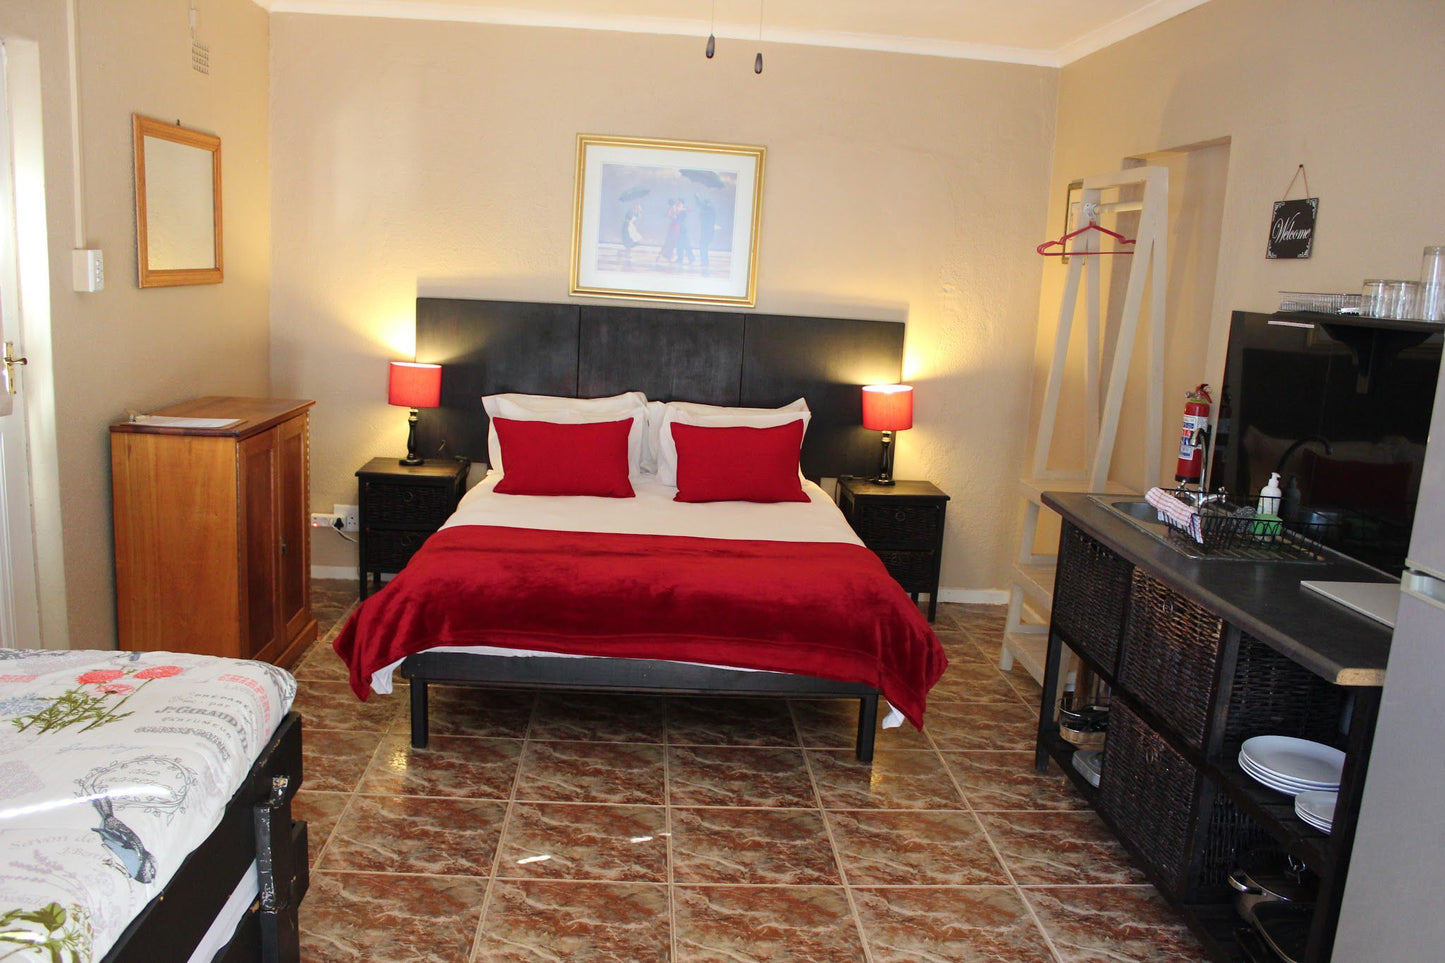 25 On Fitzpatrick Parow North Cape Town Western Cape South Africa Bedroom